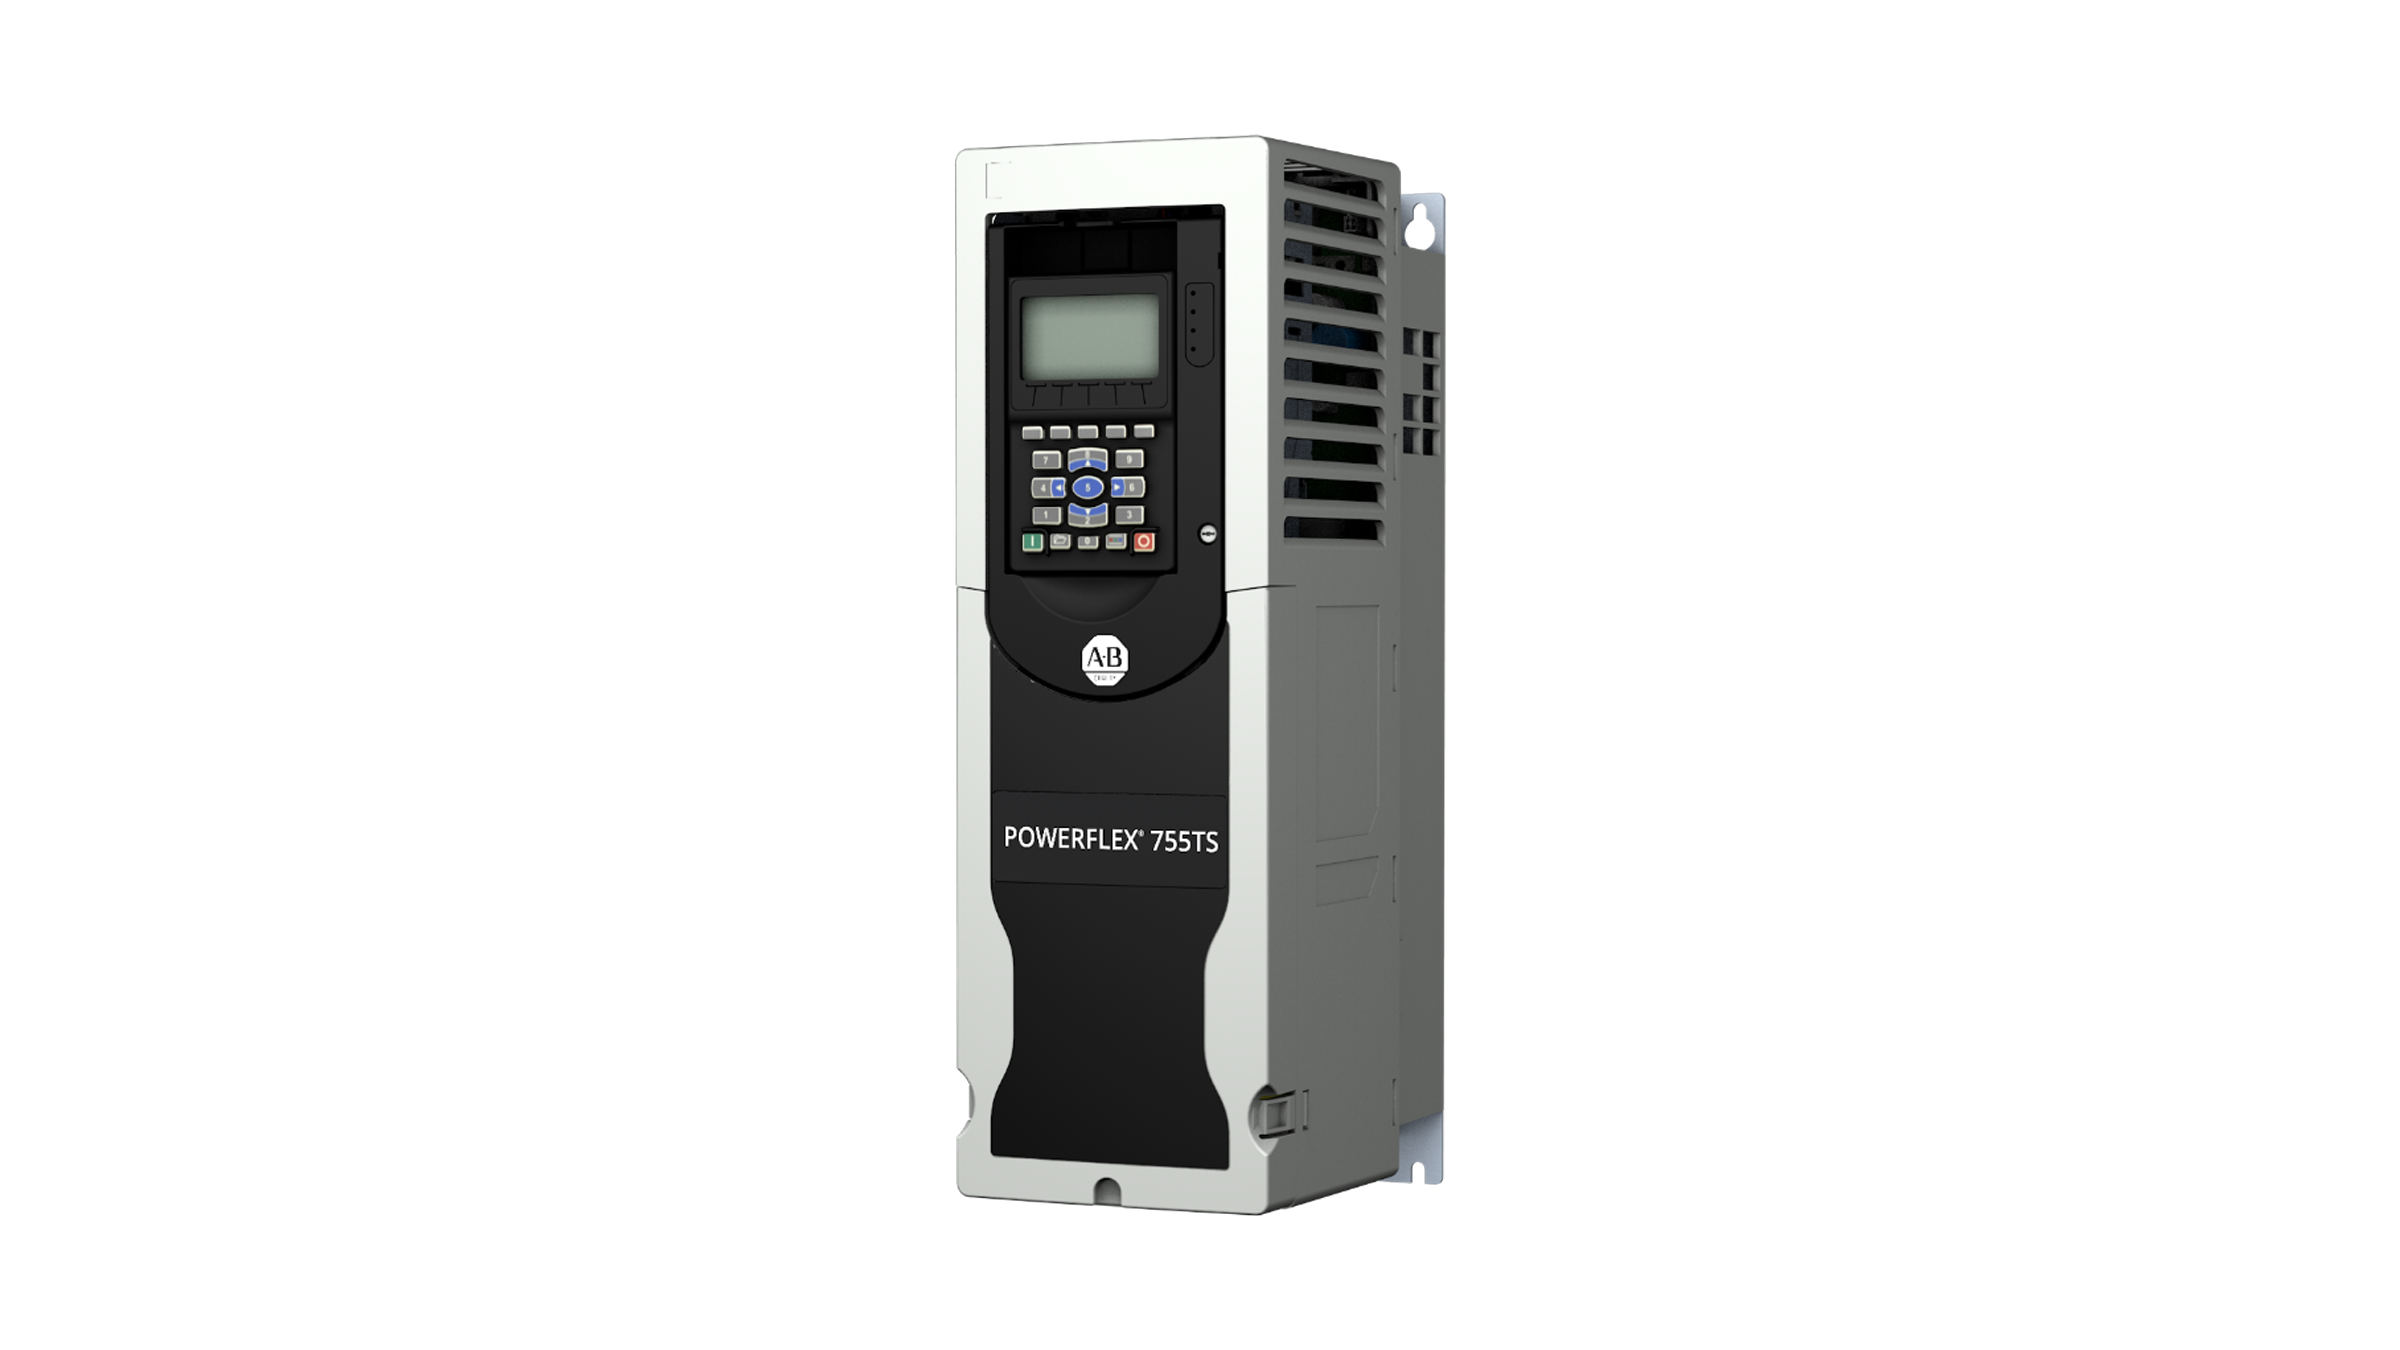 One PowerFlex 755TS drive. It is gray and black wth a keypad on the front. It is a tall , thin rectangular shape with a rounded top and flat bottom. It has an Allen-Bradley logo on it.